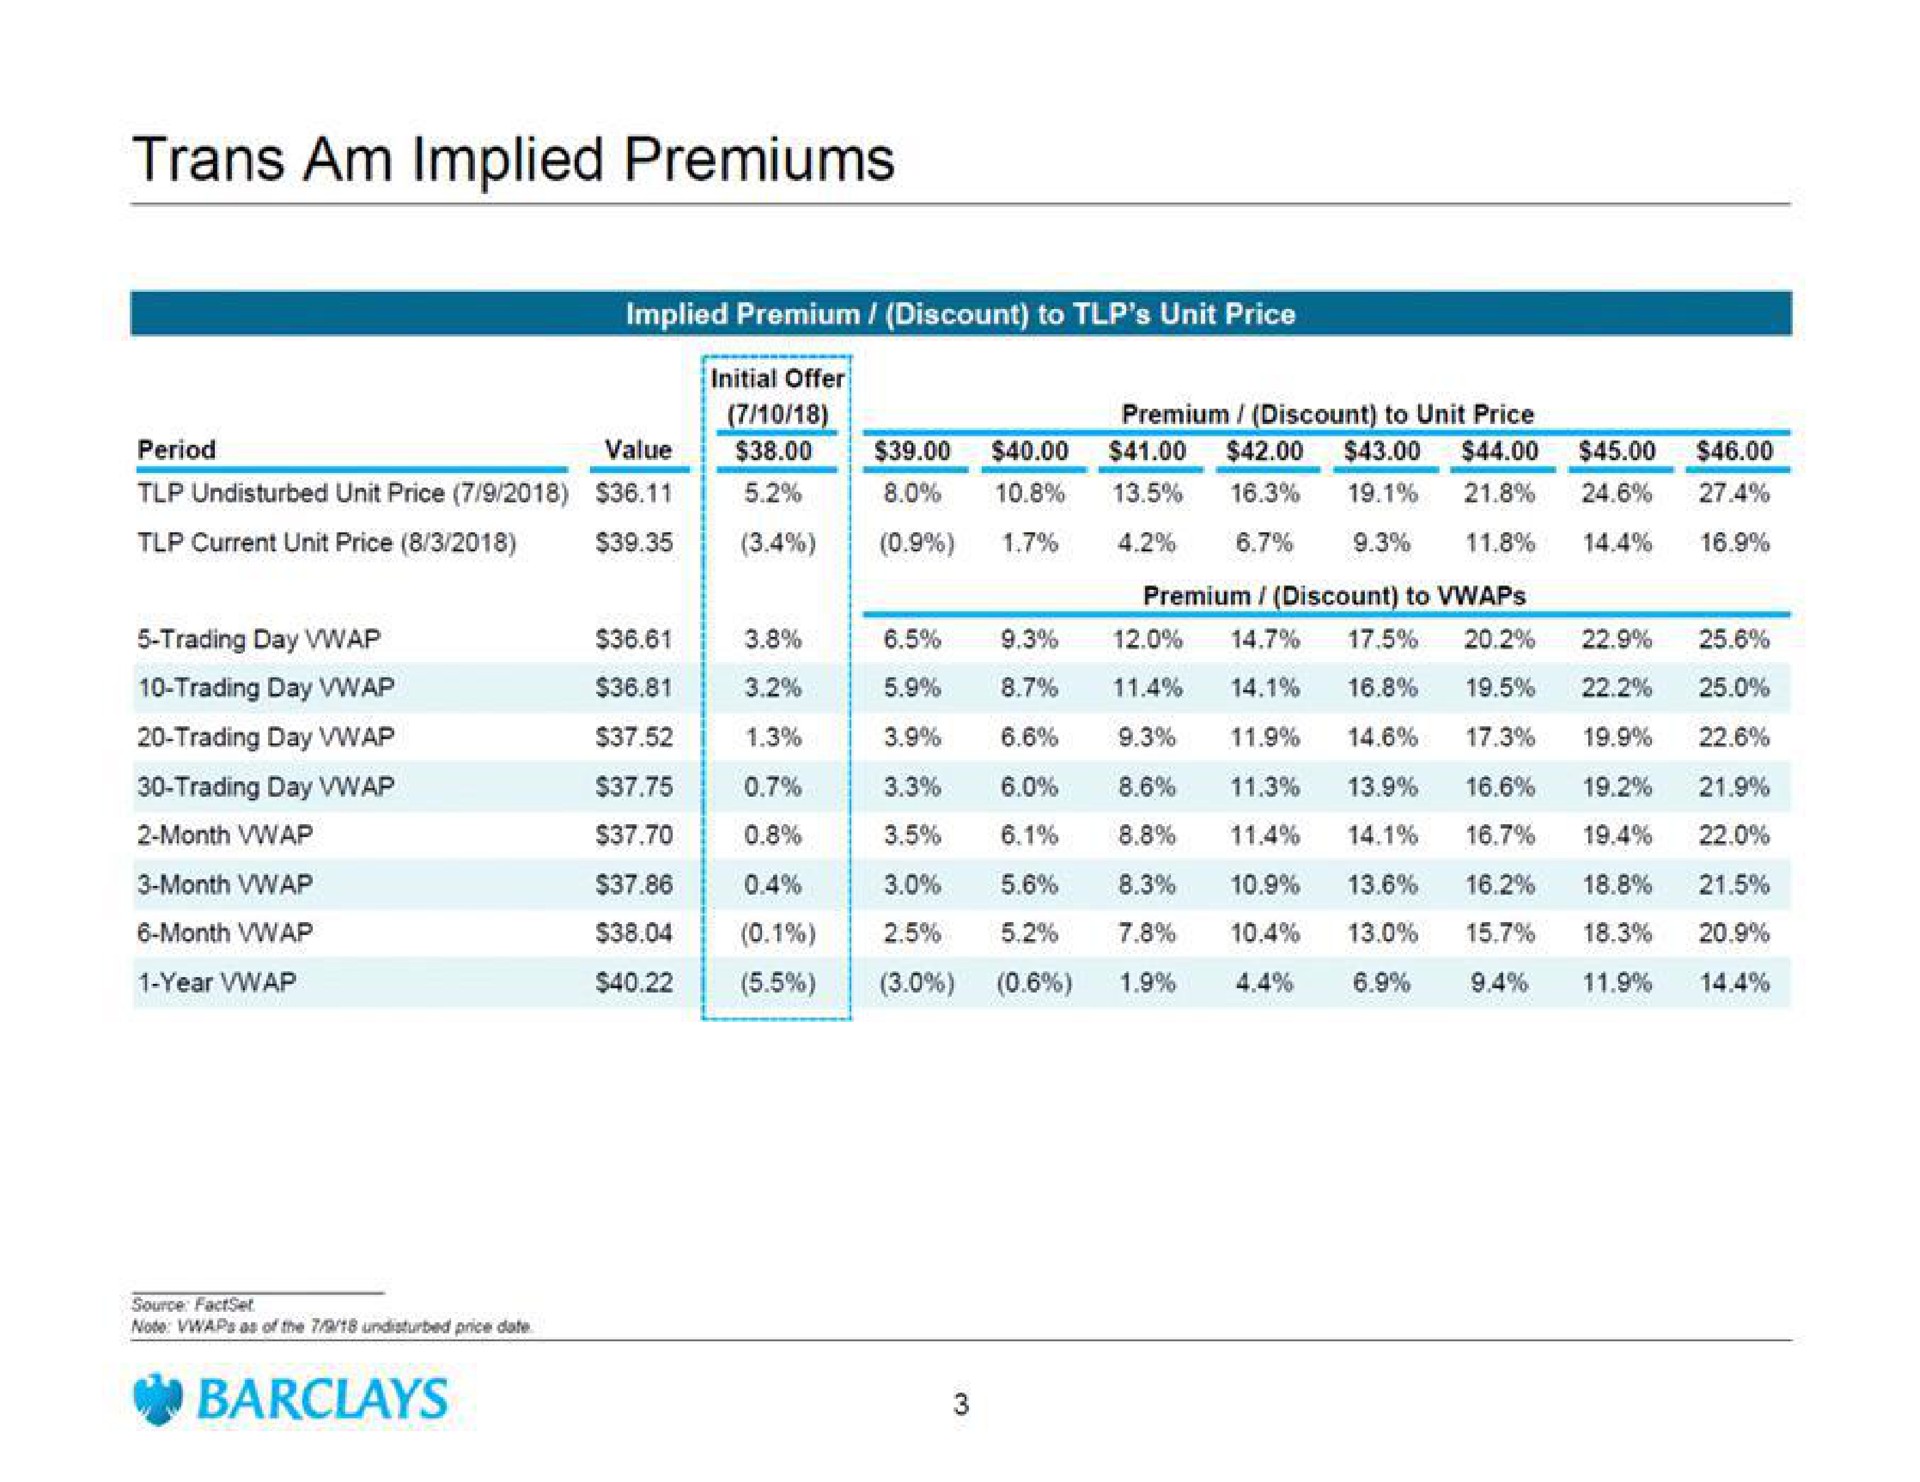 am implied premiums implied premium discount to unit price initial offer aes trading day month month month year | Barclays